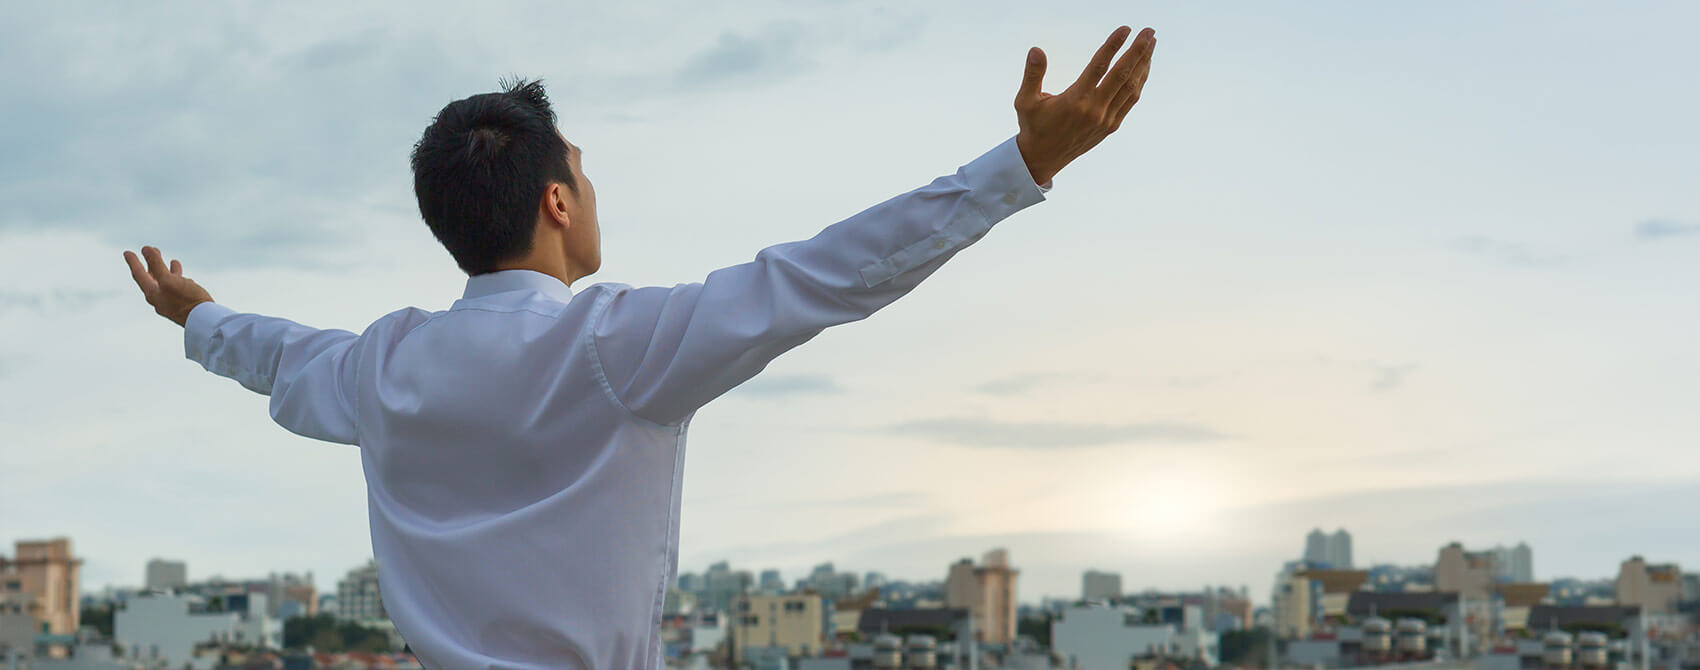 A man wearing a white button-down shirt raises his arms in supplication on a rooftop at sunrise.